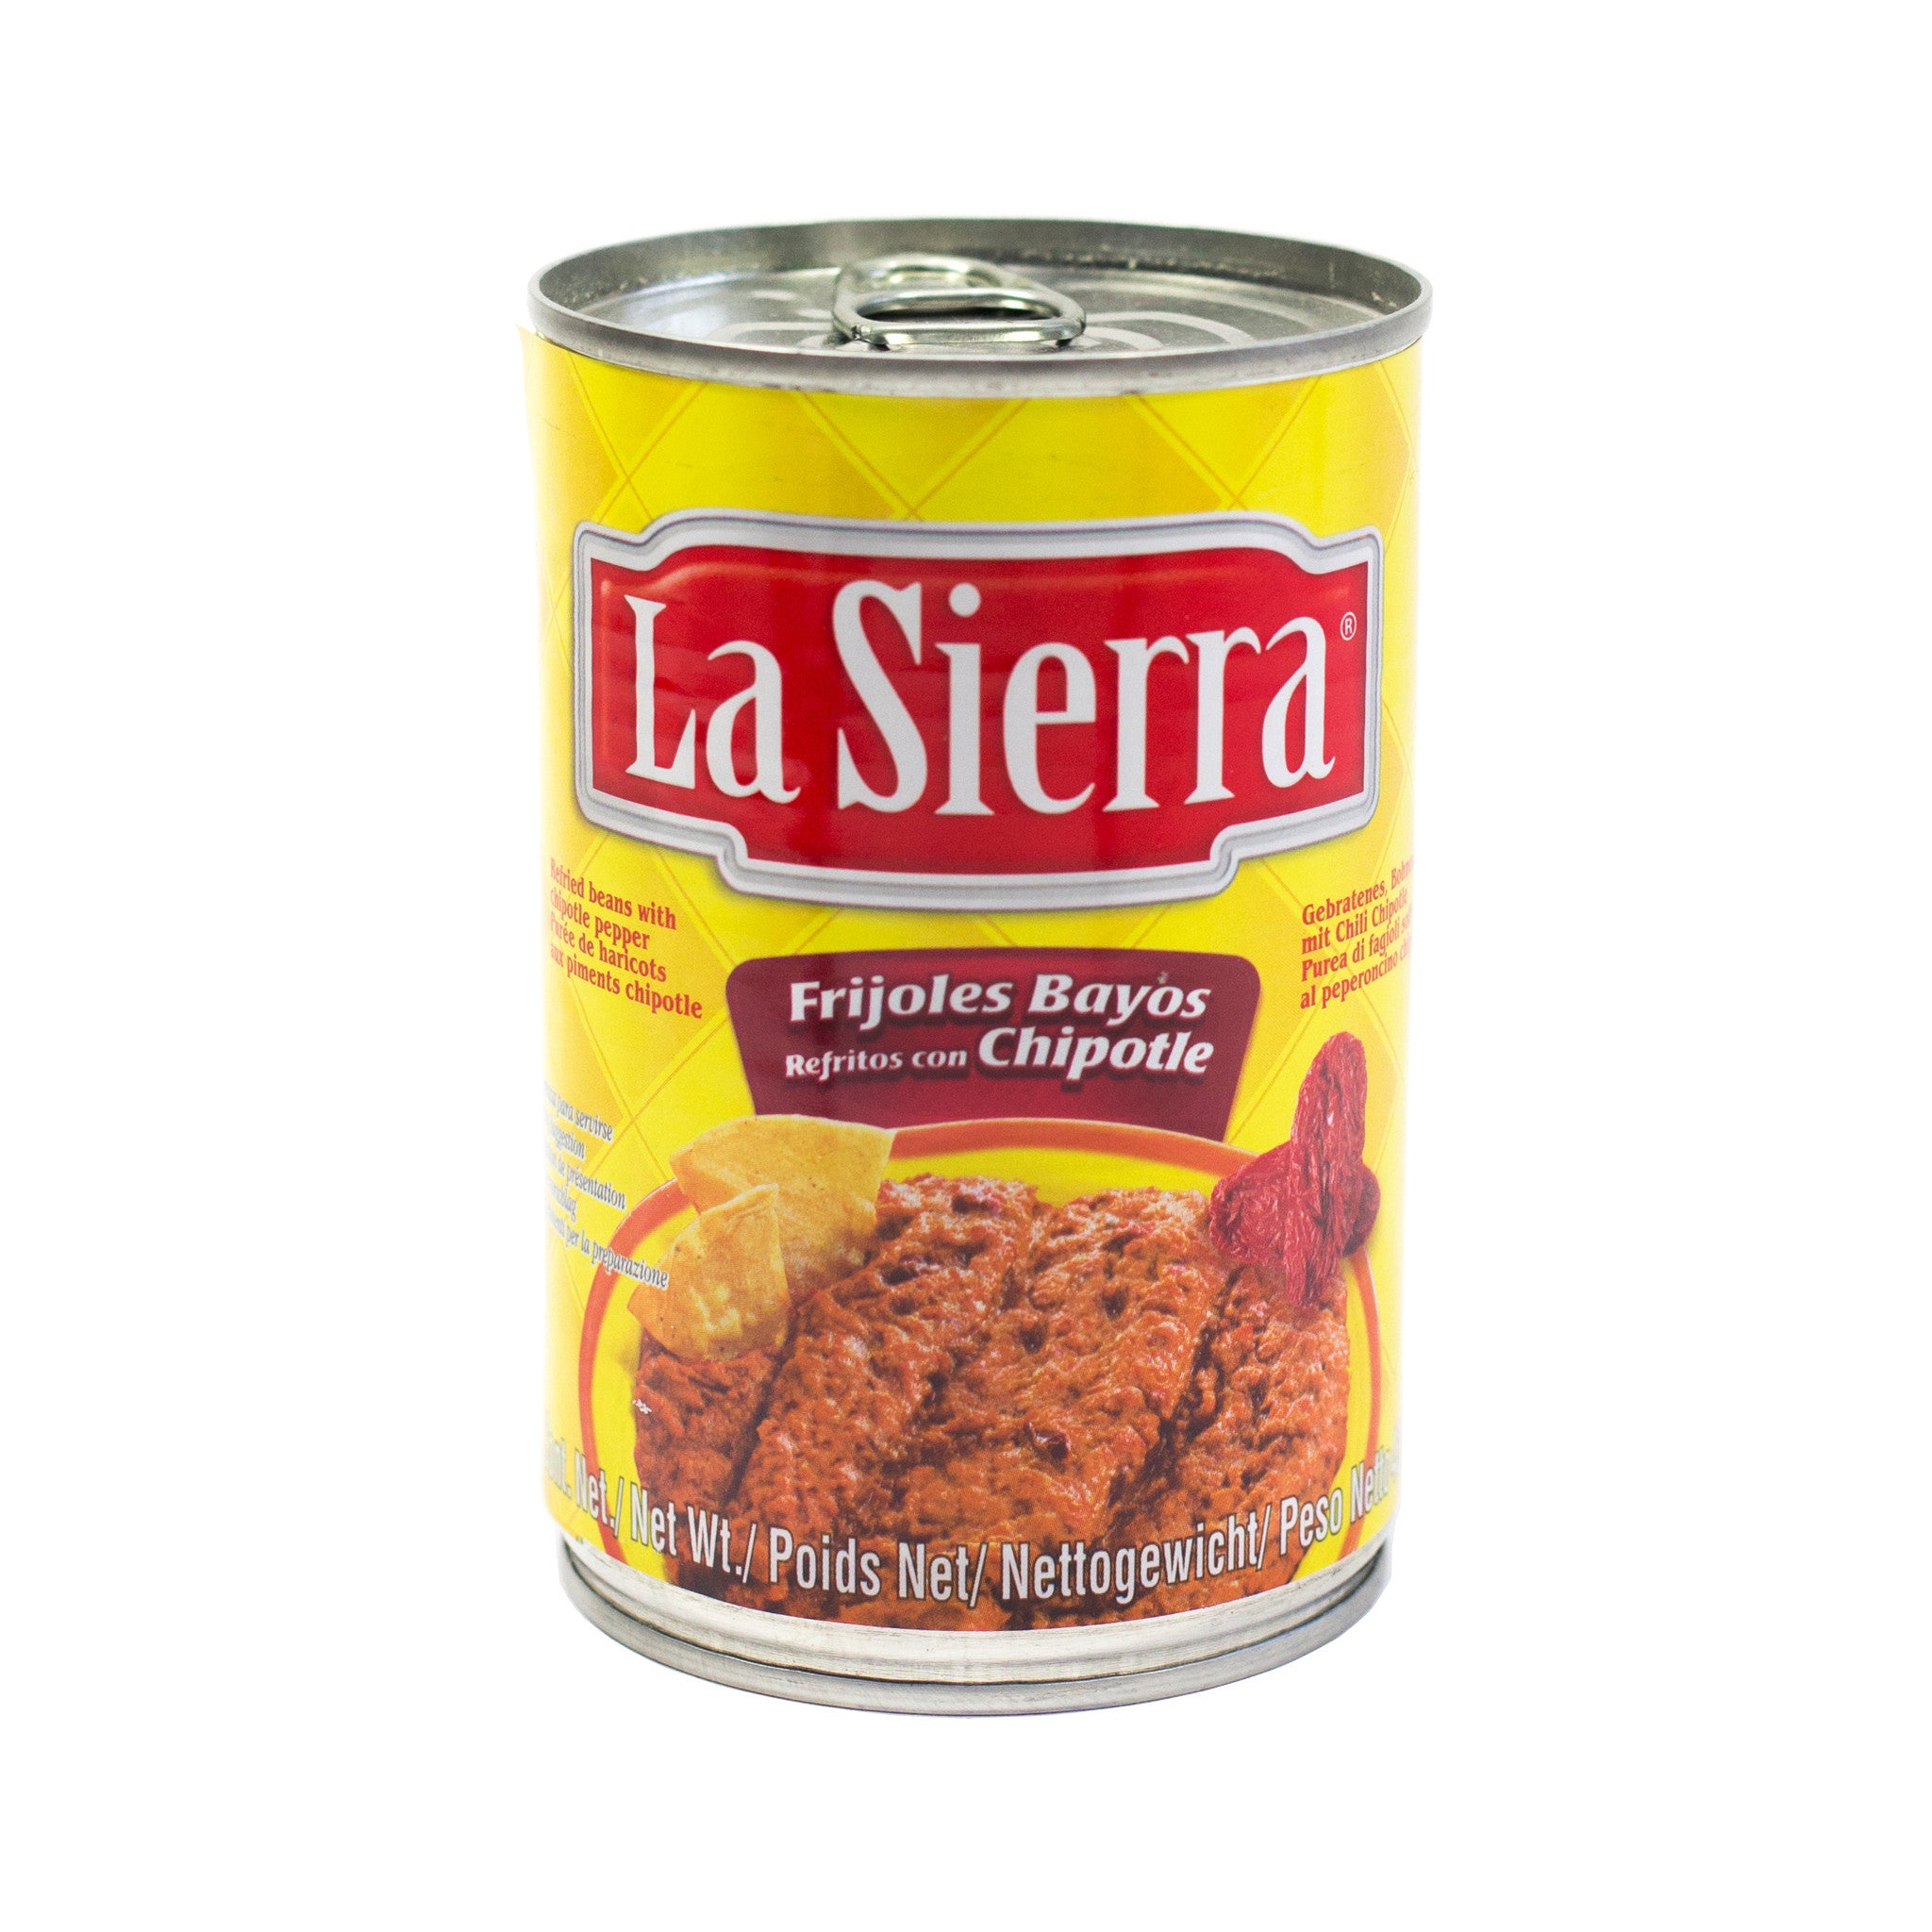 Refried Beans with Chipotle, La Sierra